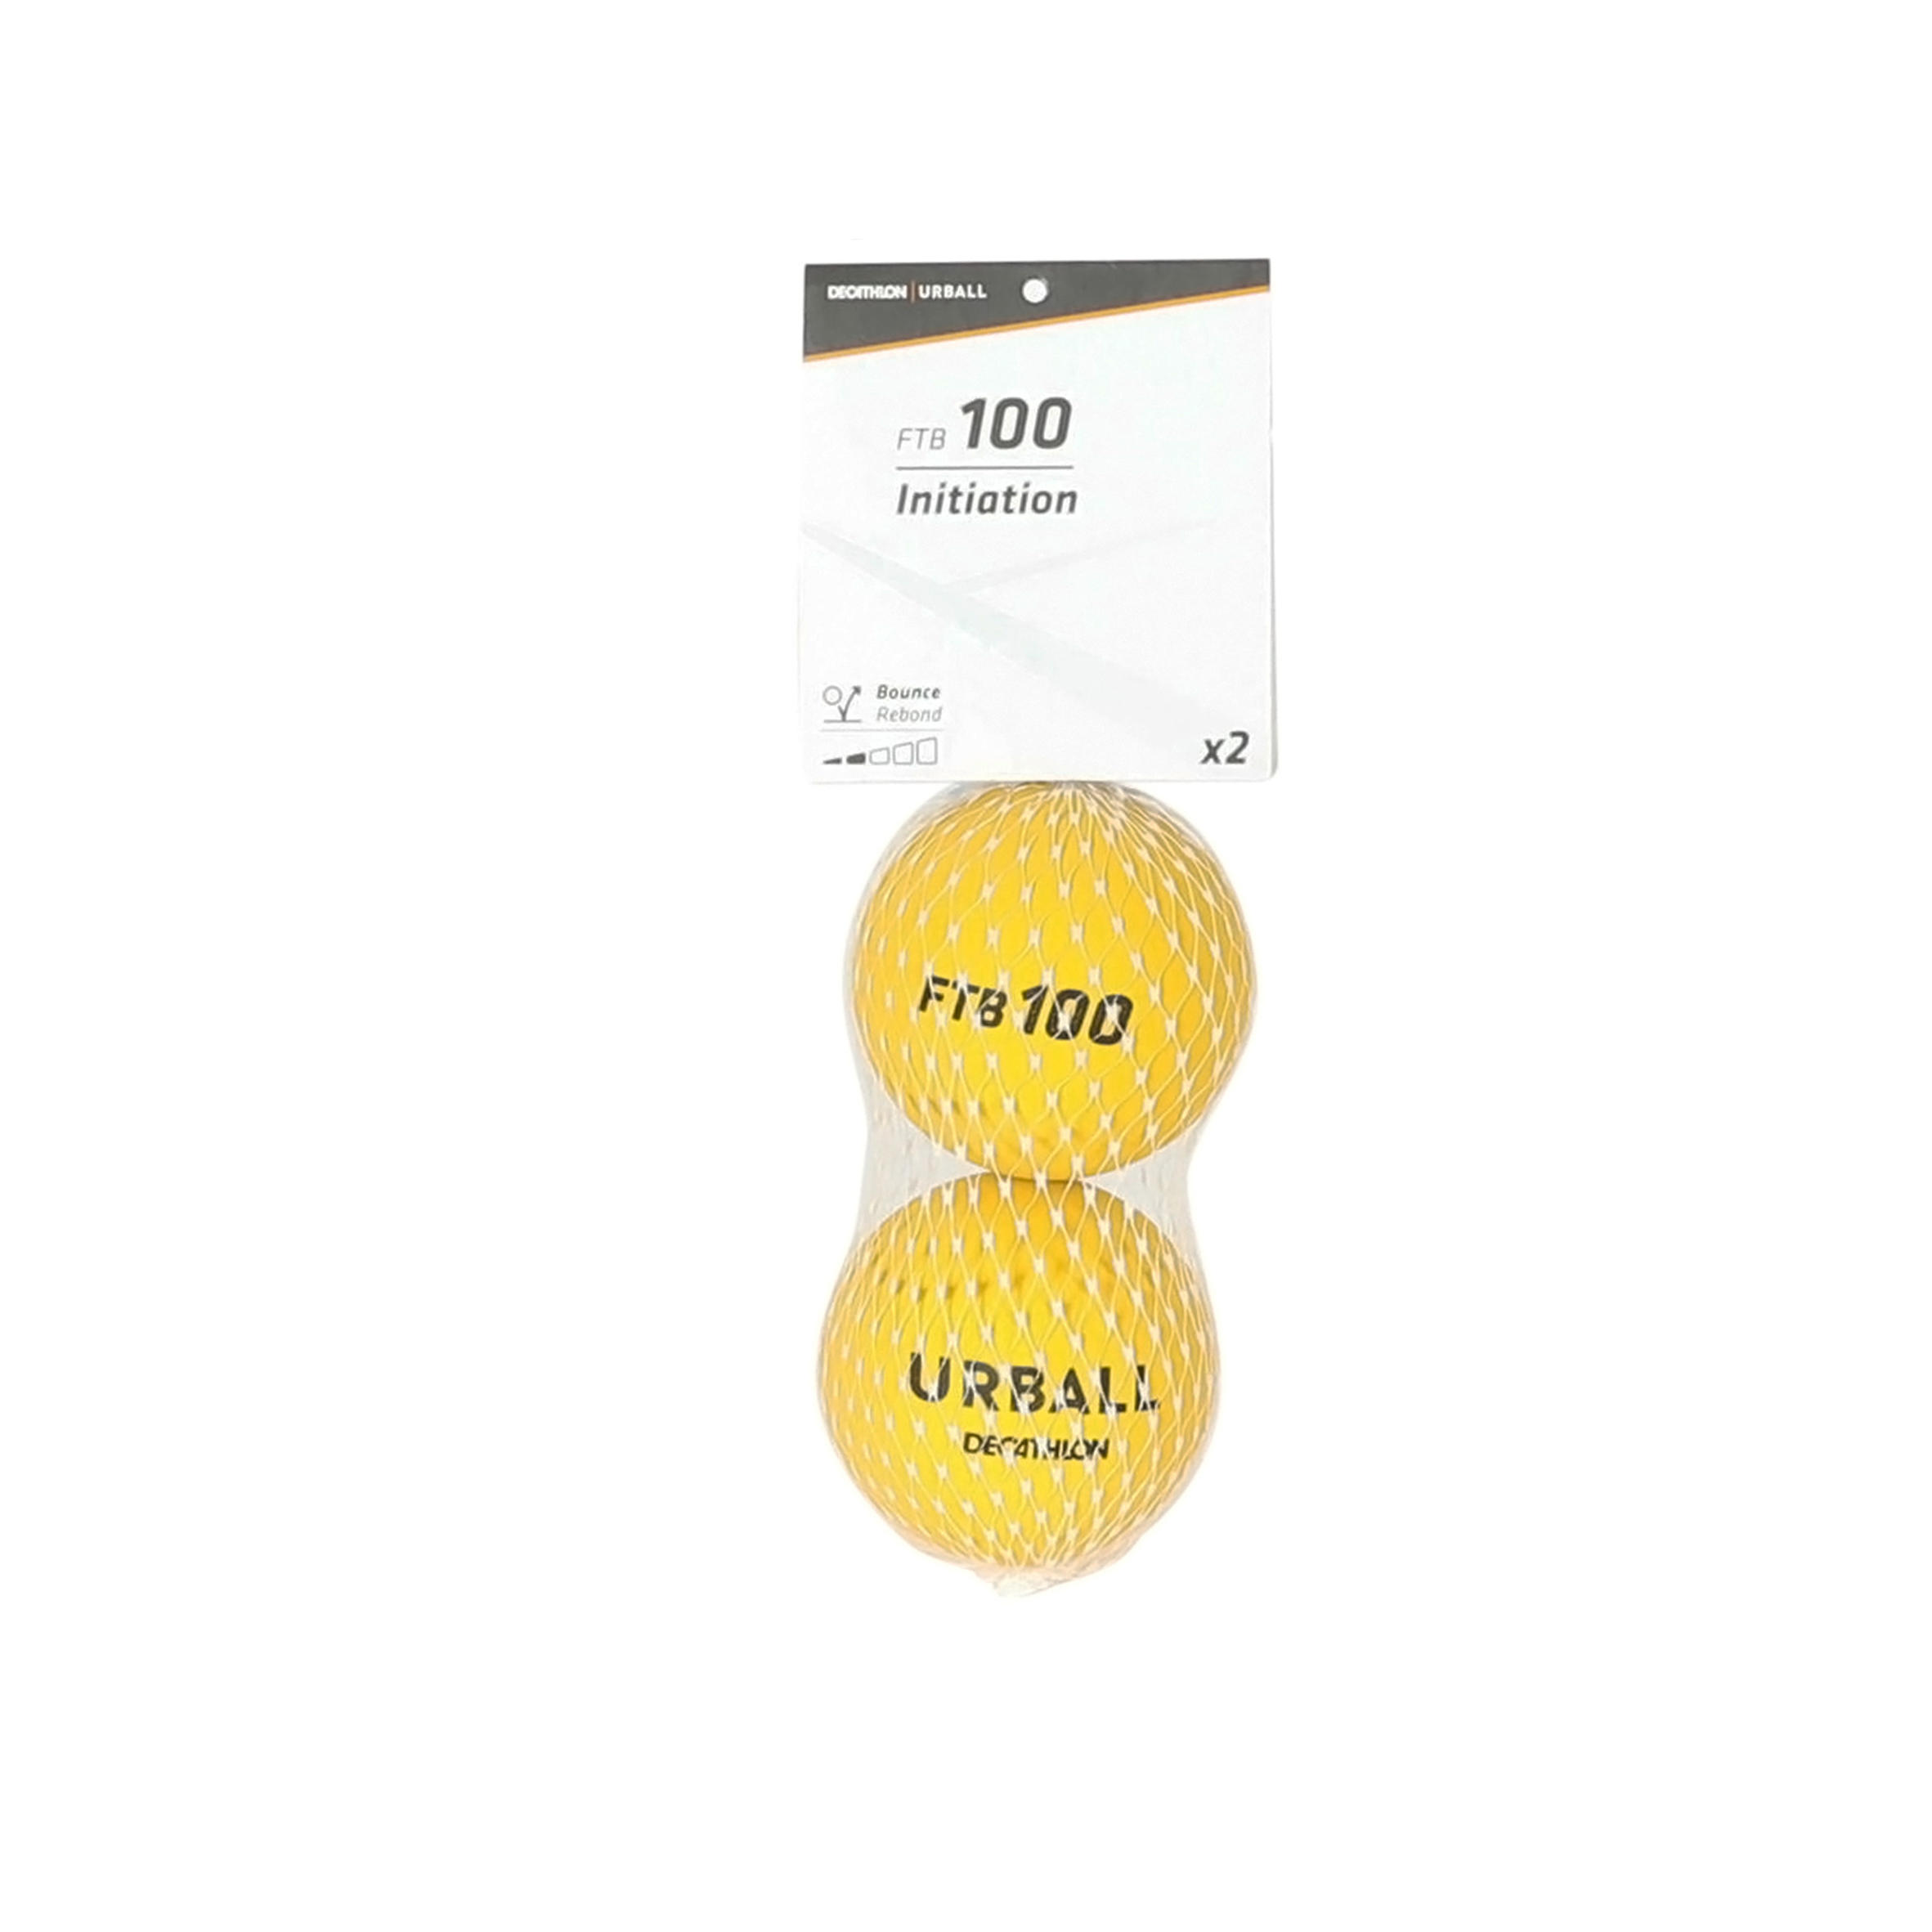 Frontenis One Wall Balls FTB100 Two-Pack - Yellow 4/4